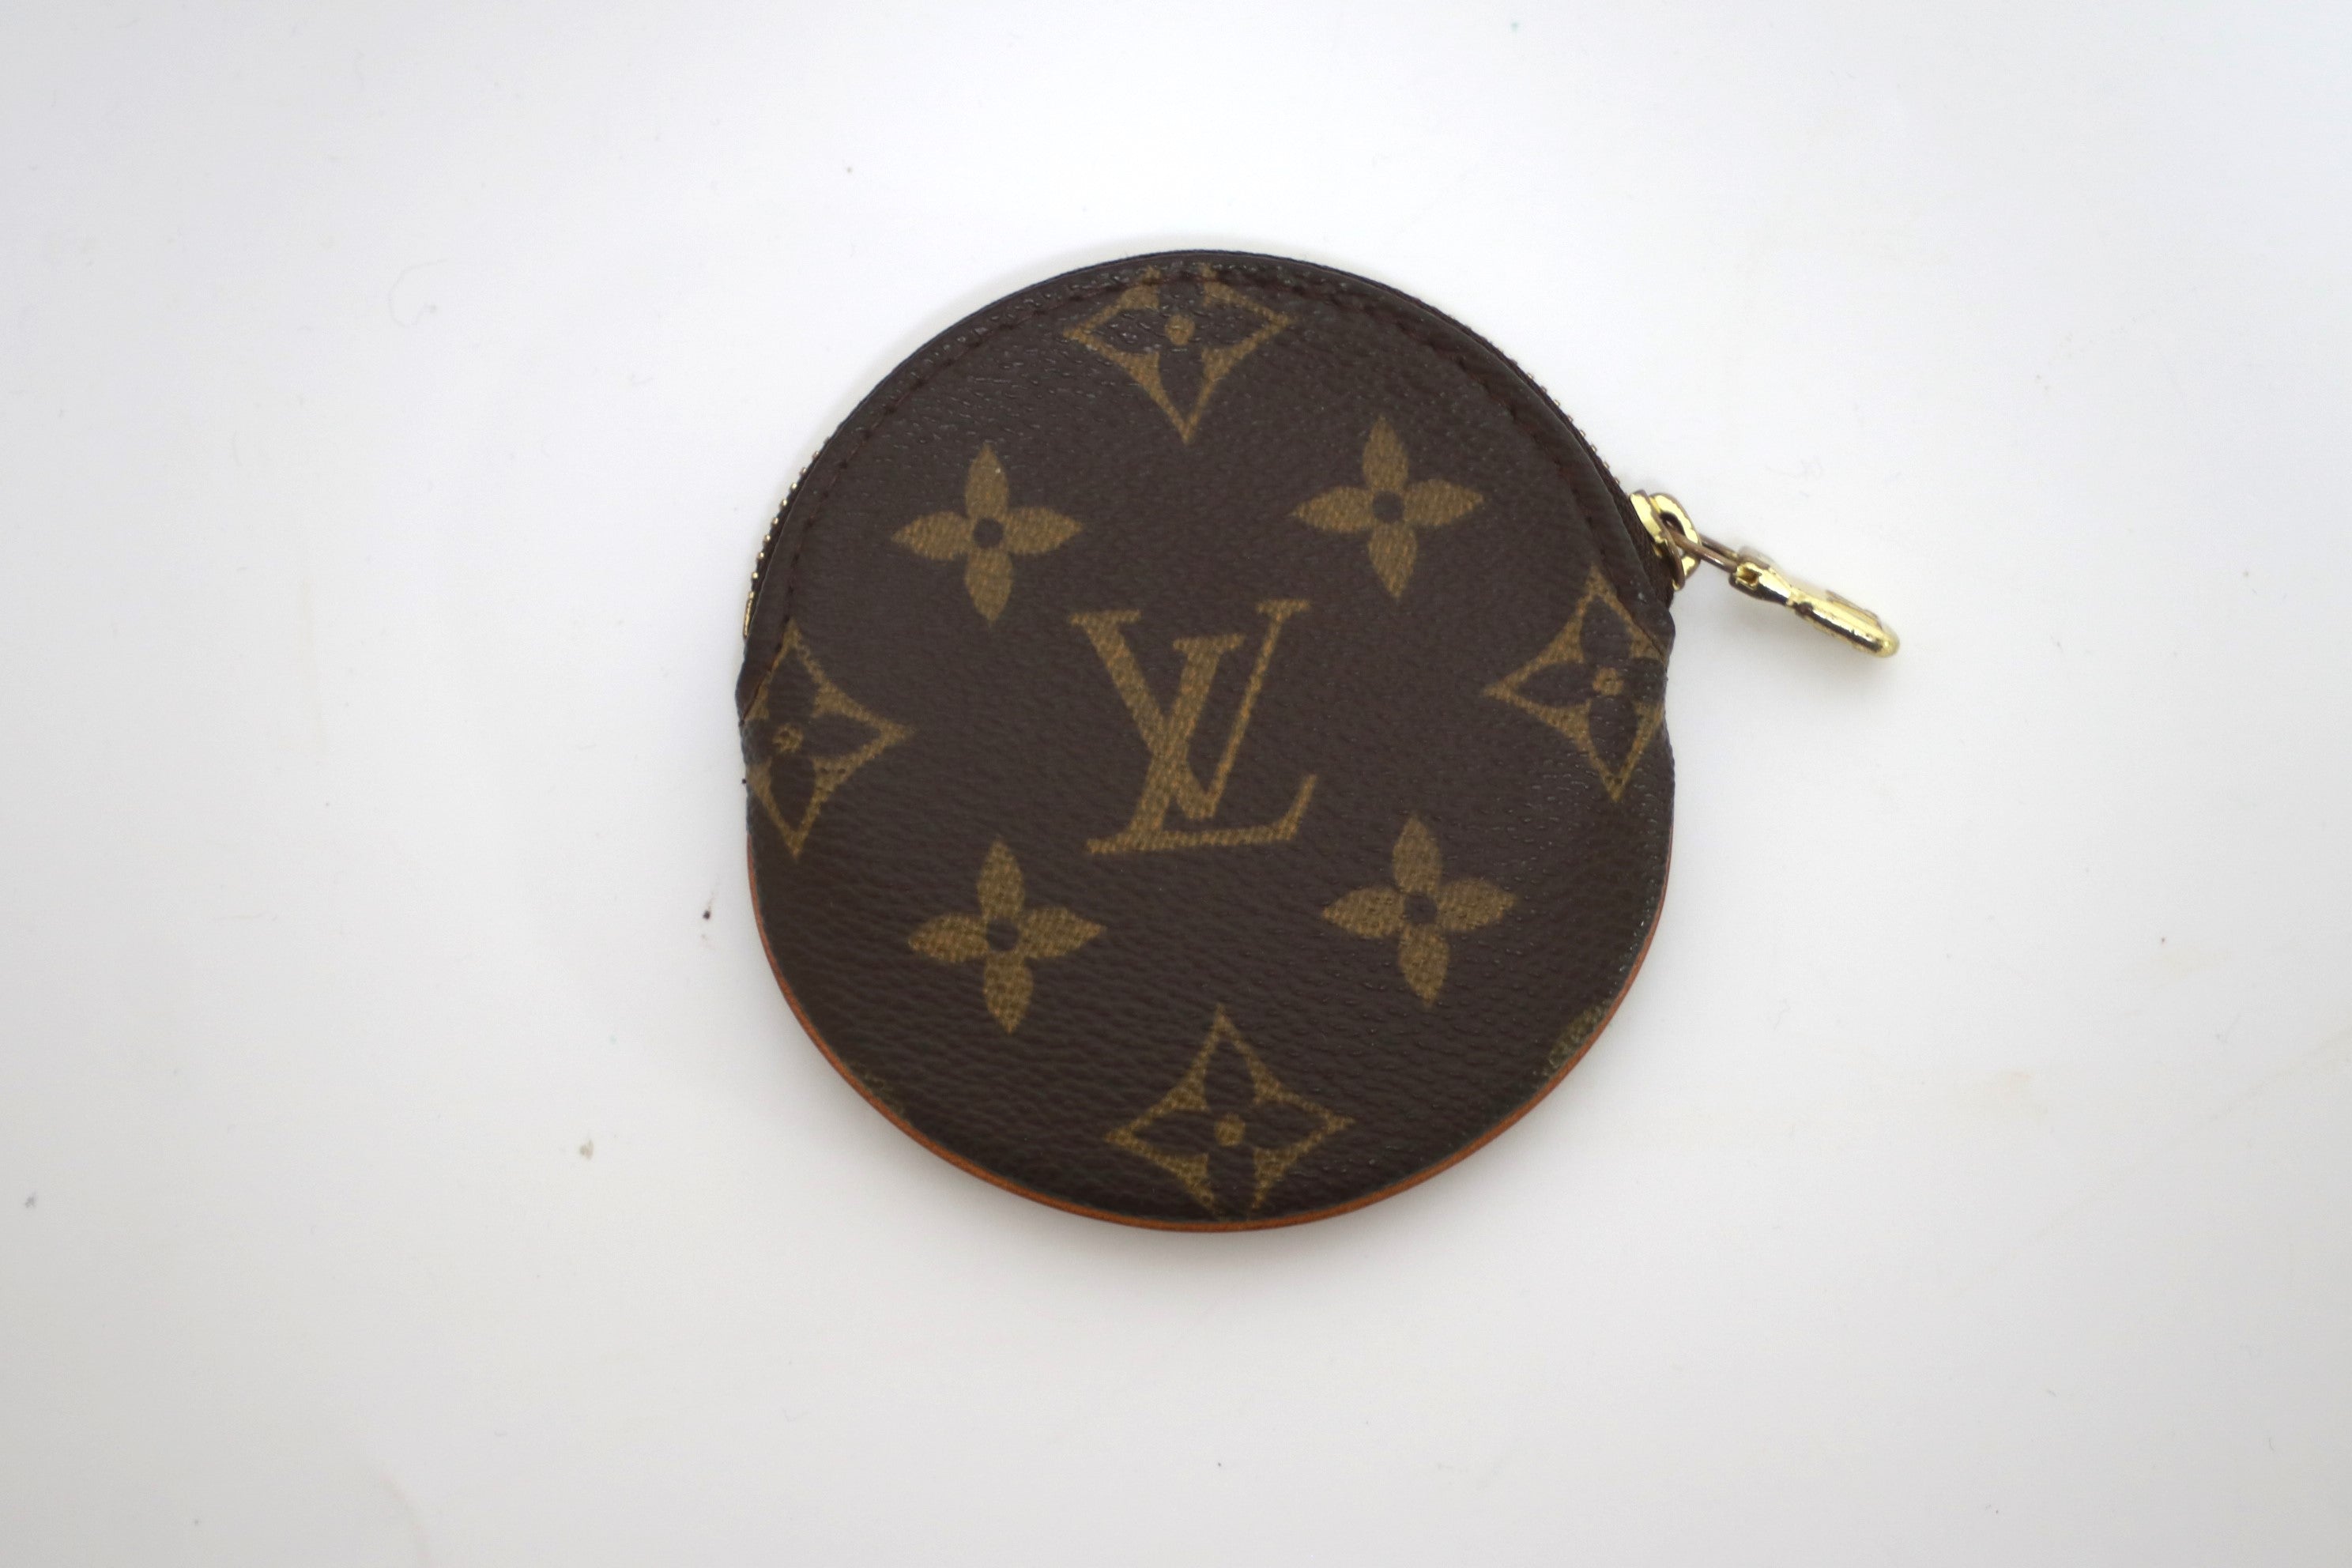 Louis Vuitton Round Coin Purse Used (7516)